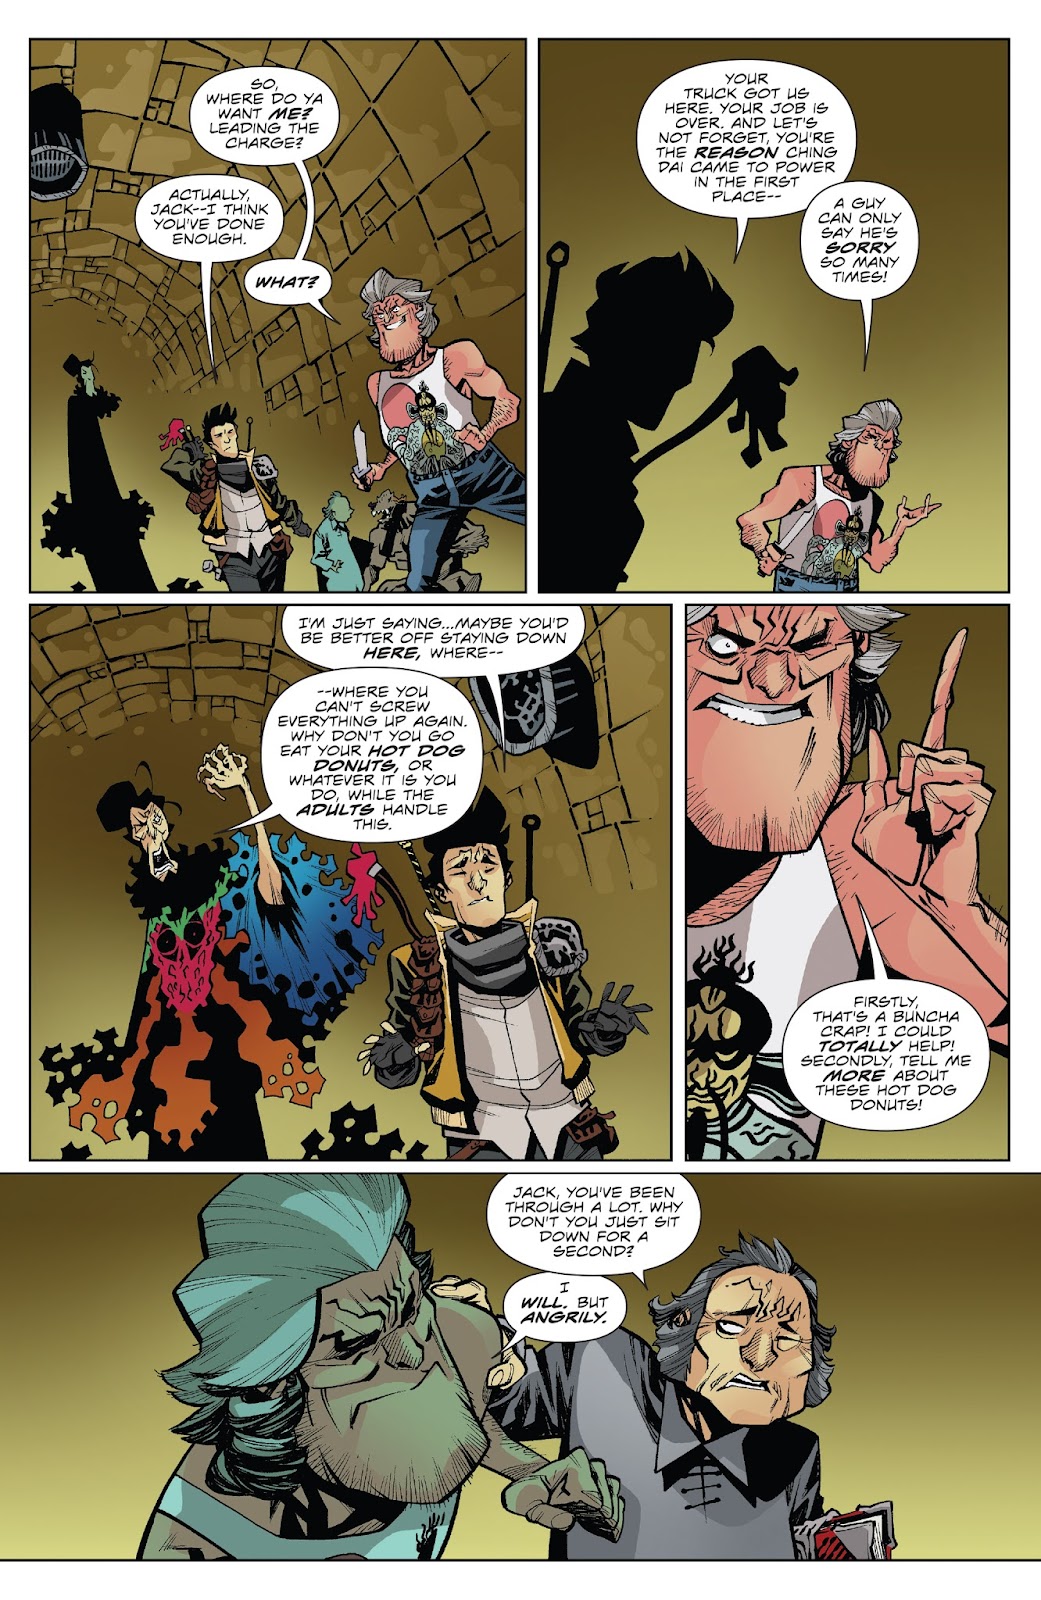 Big Trouble in Little China: Old Man Jack issue 7 - Page 14